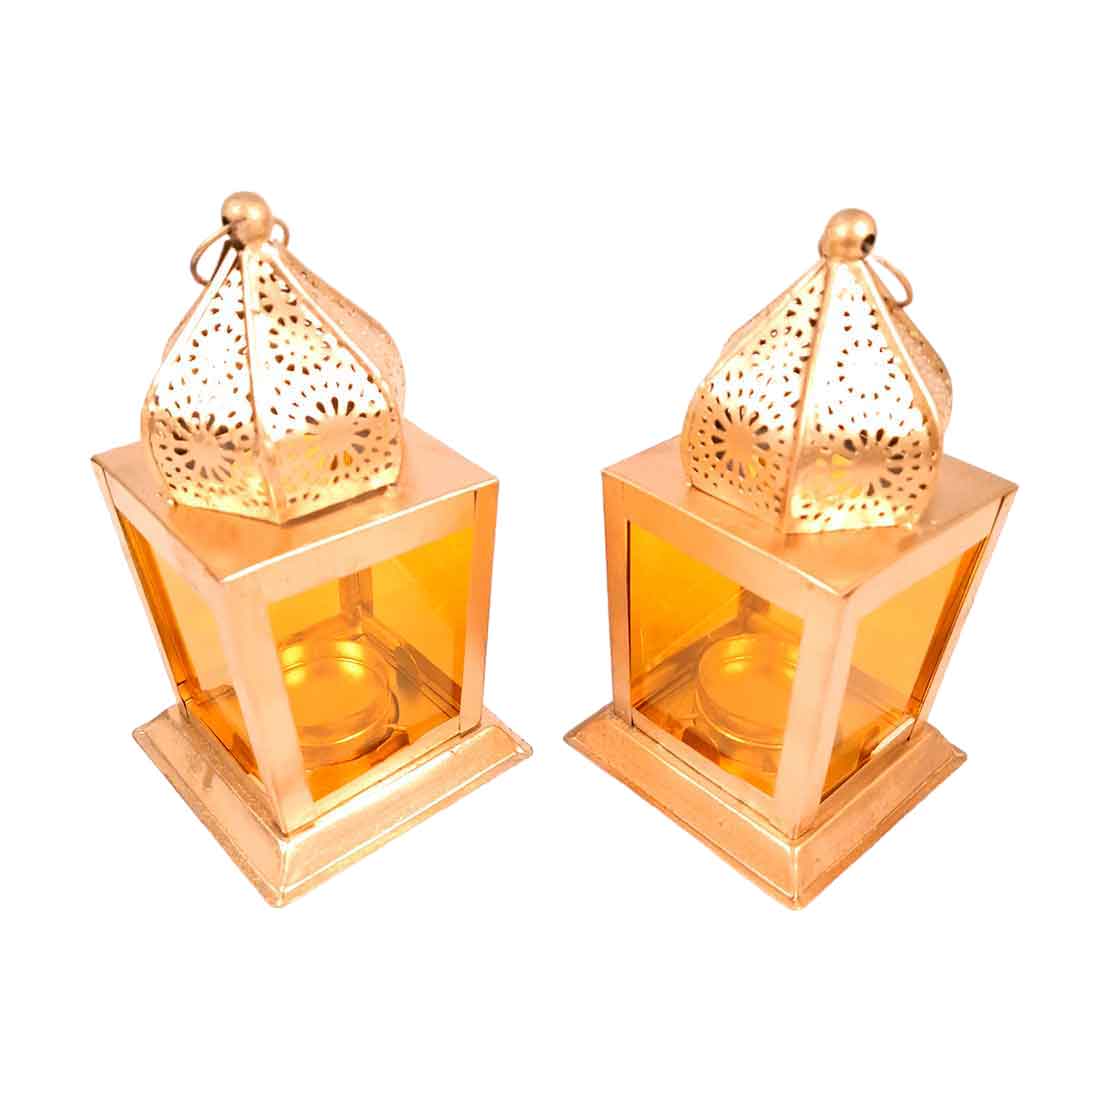 Moroccan Lantern Candle Stand | Tea Light Holder - For Home, Living room Decor & Gifts - 7 Inch - Apkamart #Style_Pack of 2